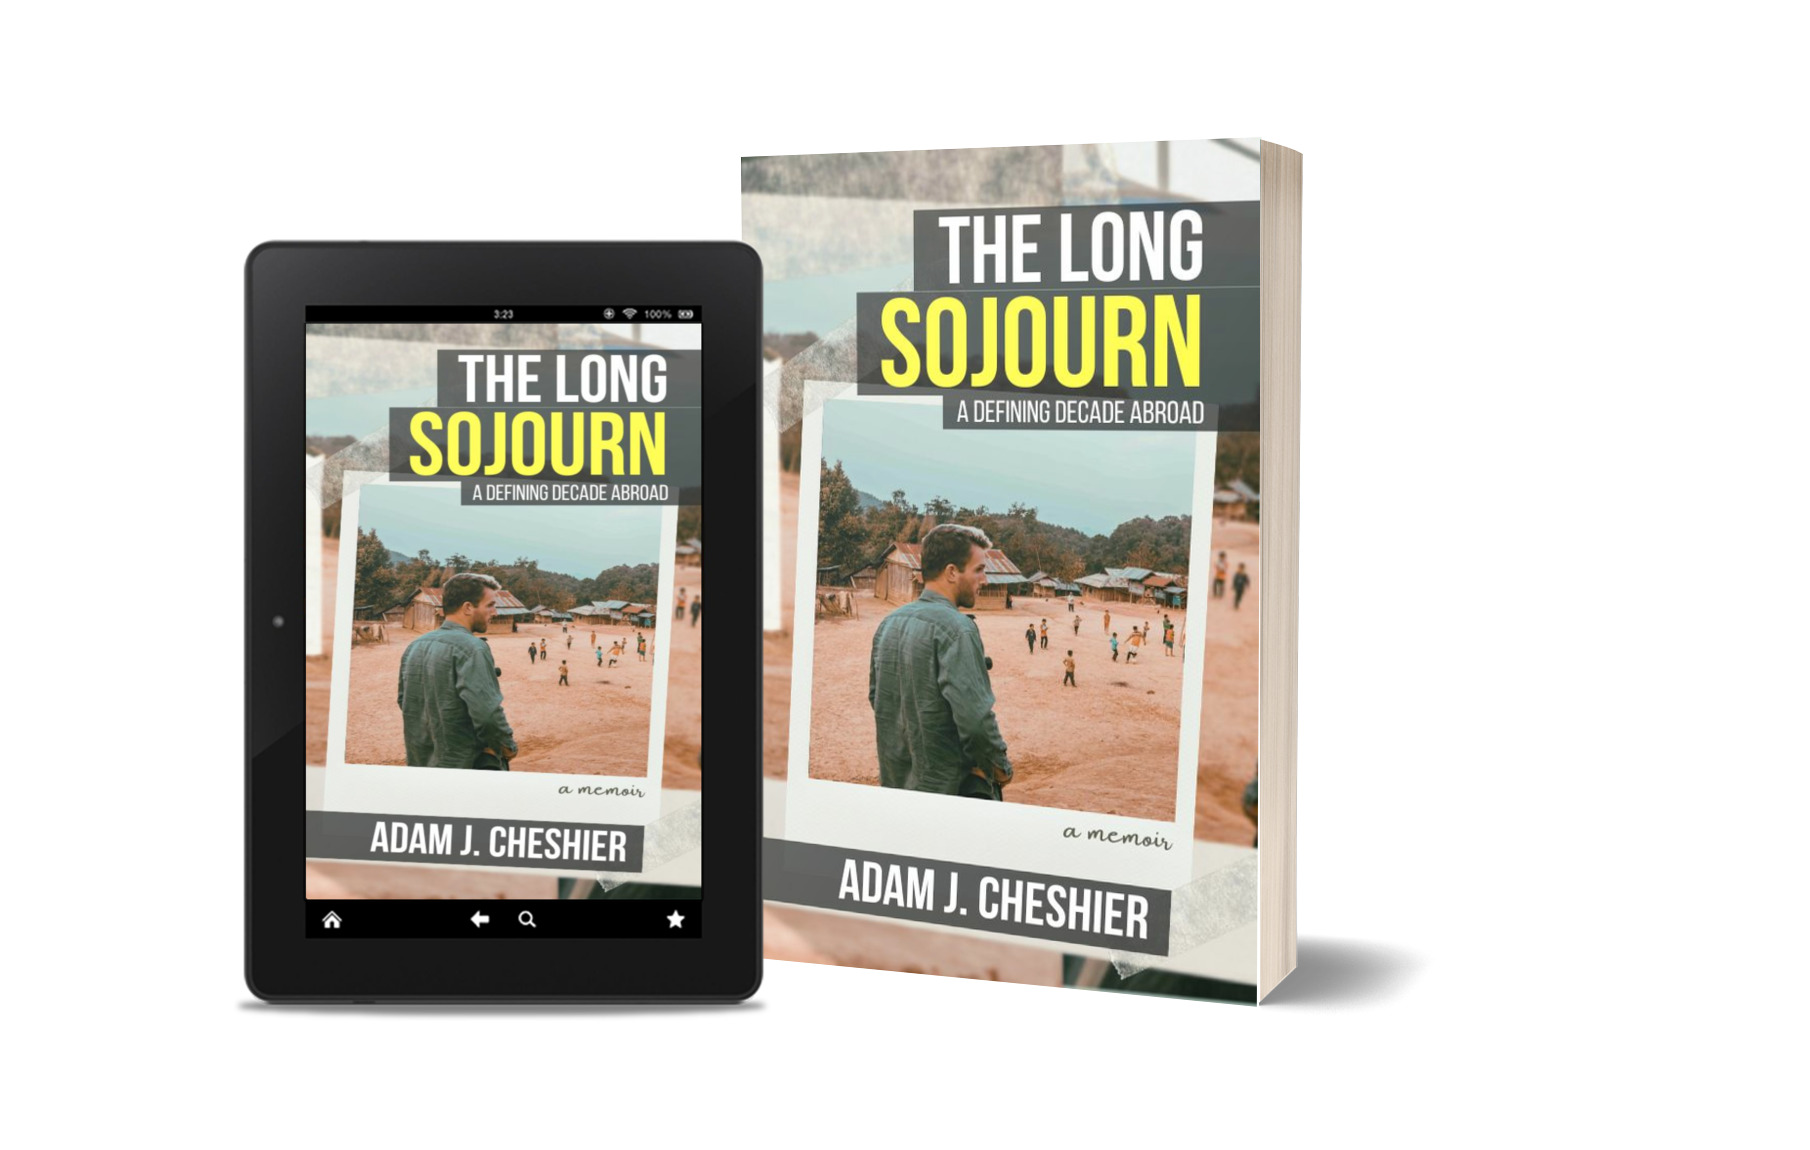 The Long Sojourn: A Defining Decade Abroad - Memoir by Adam J. Cheshier